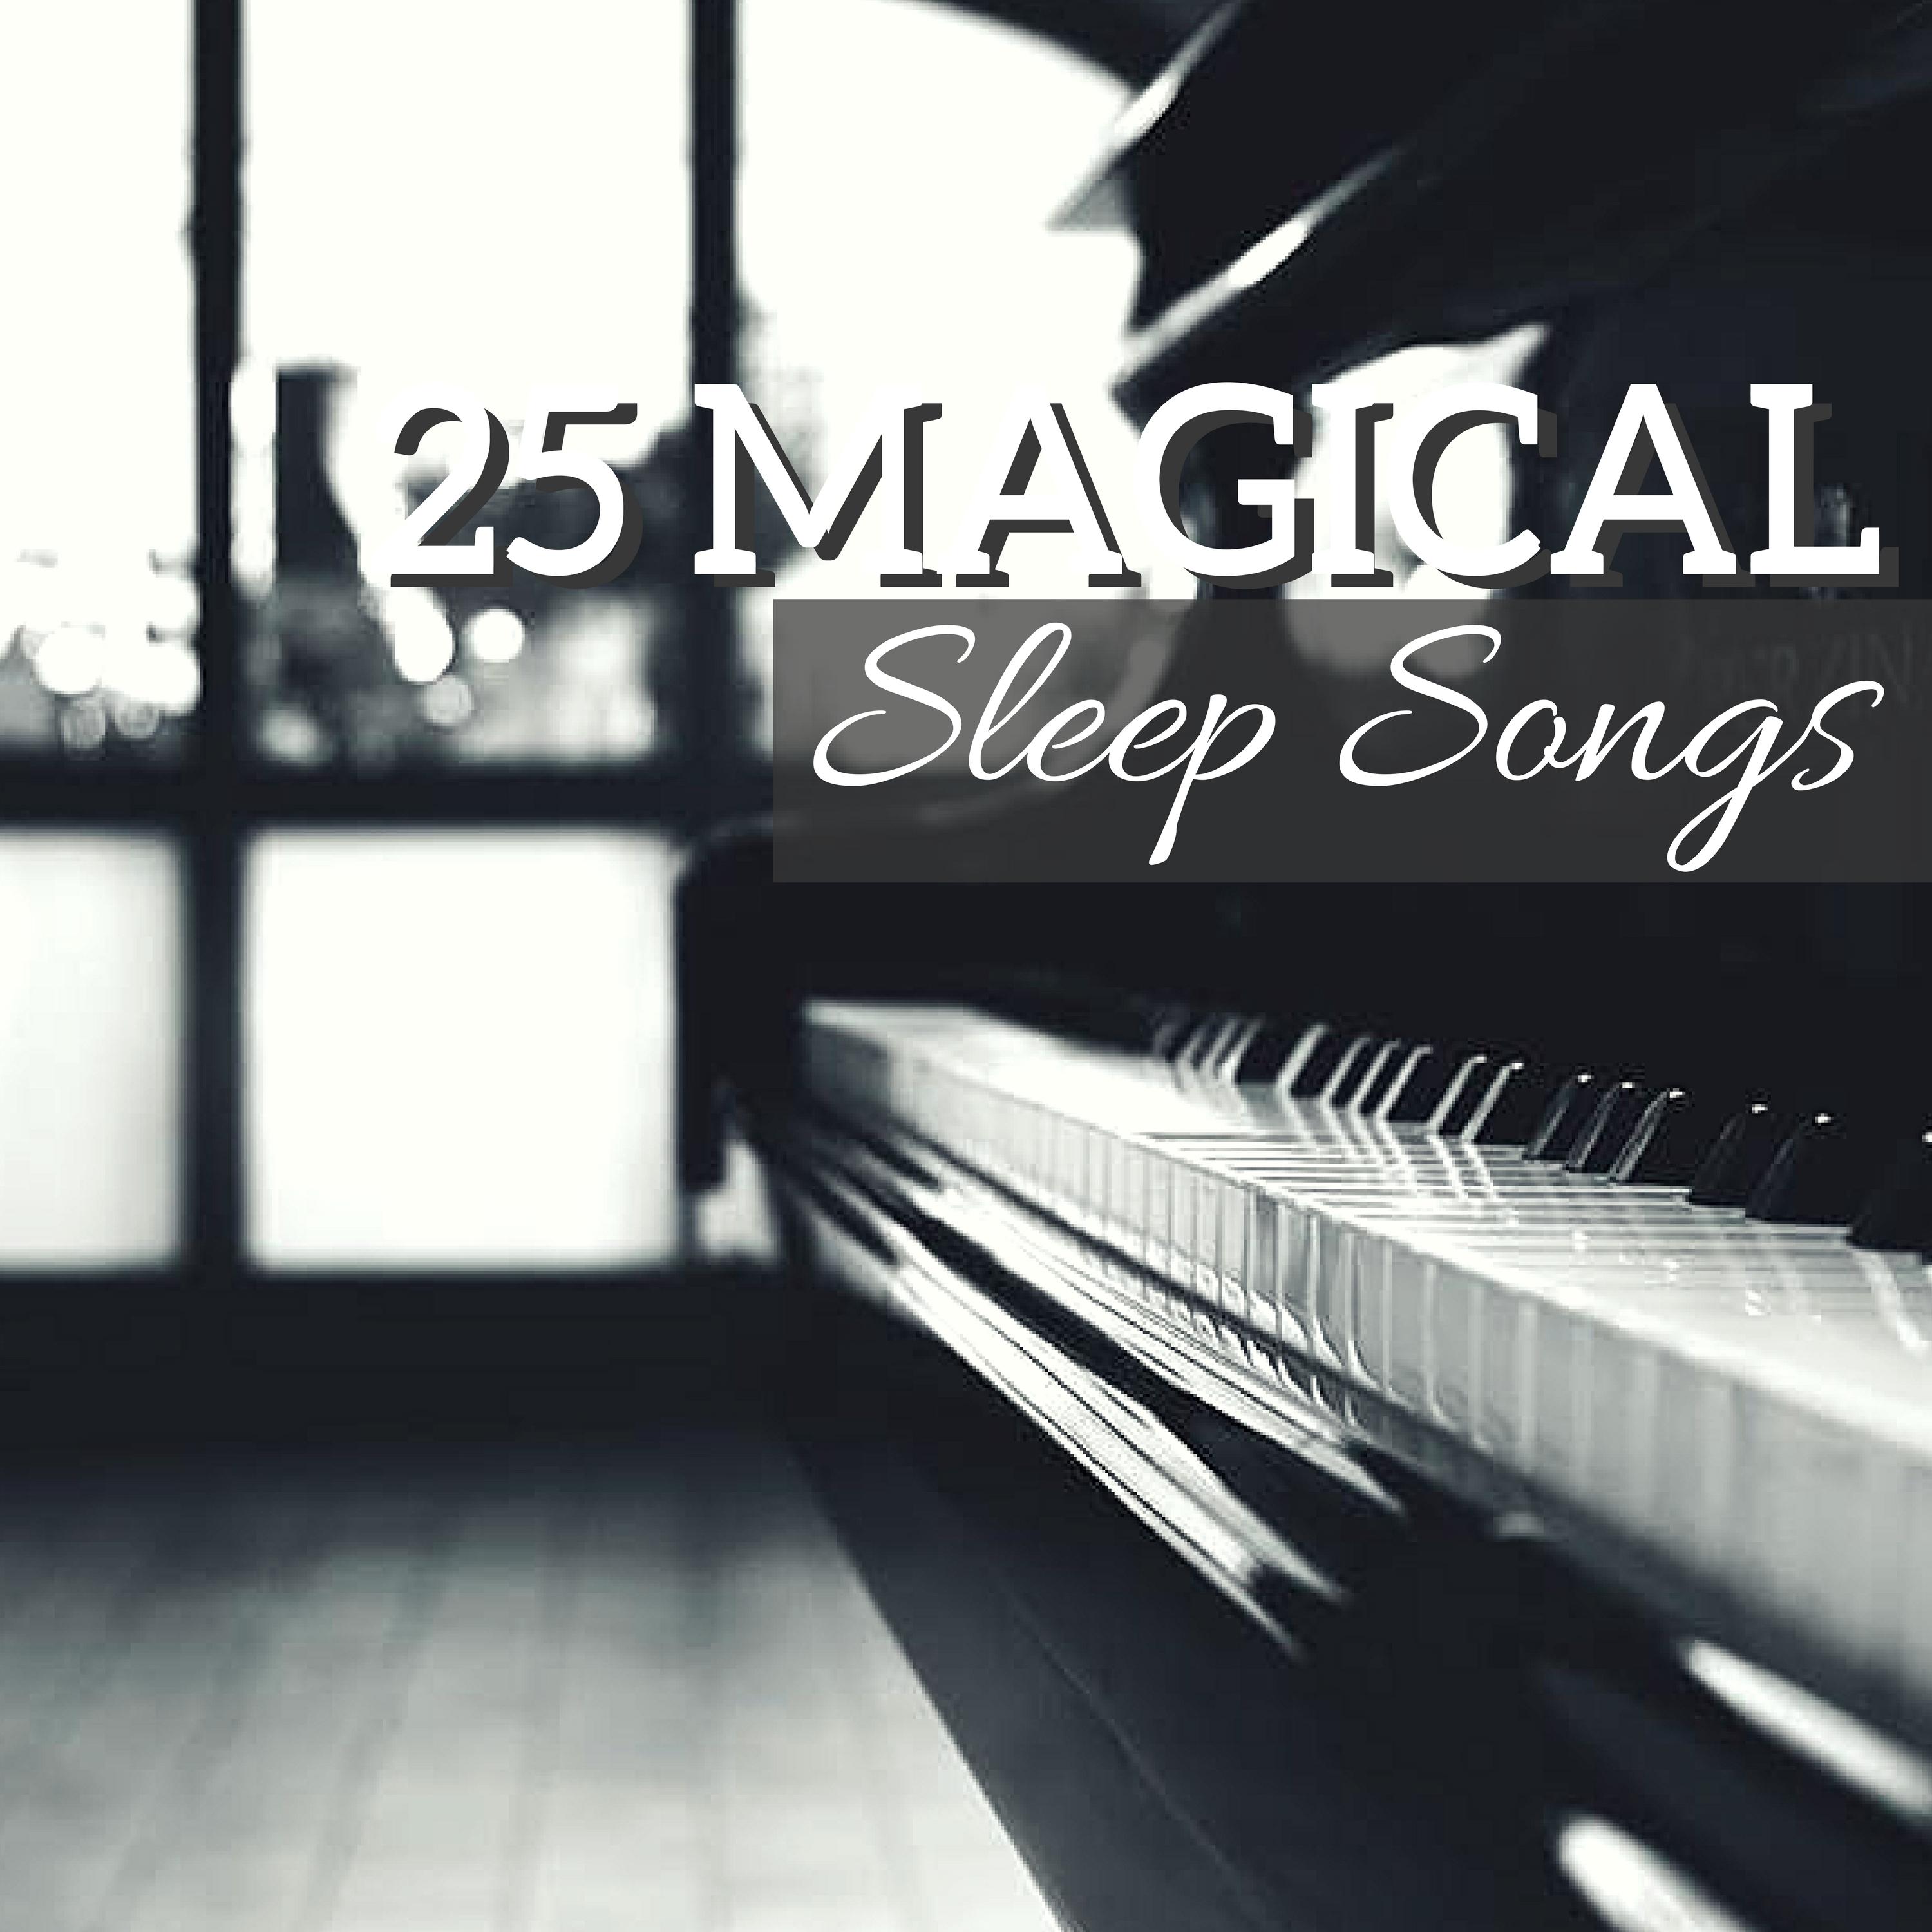 25 Magical Sleep Songs - Piano Improvisation for Relaxation Techniques, Deep Sleeping